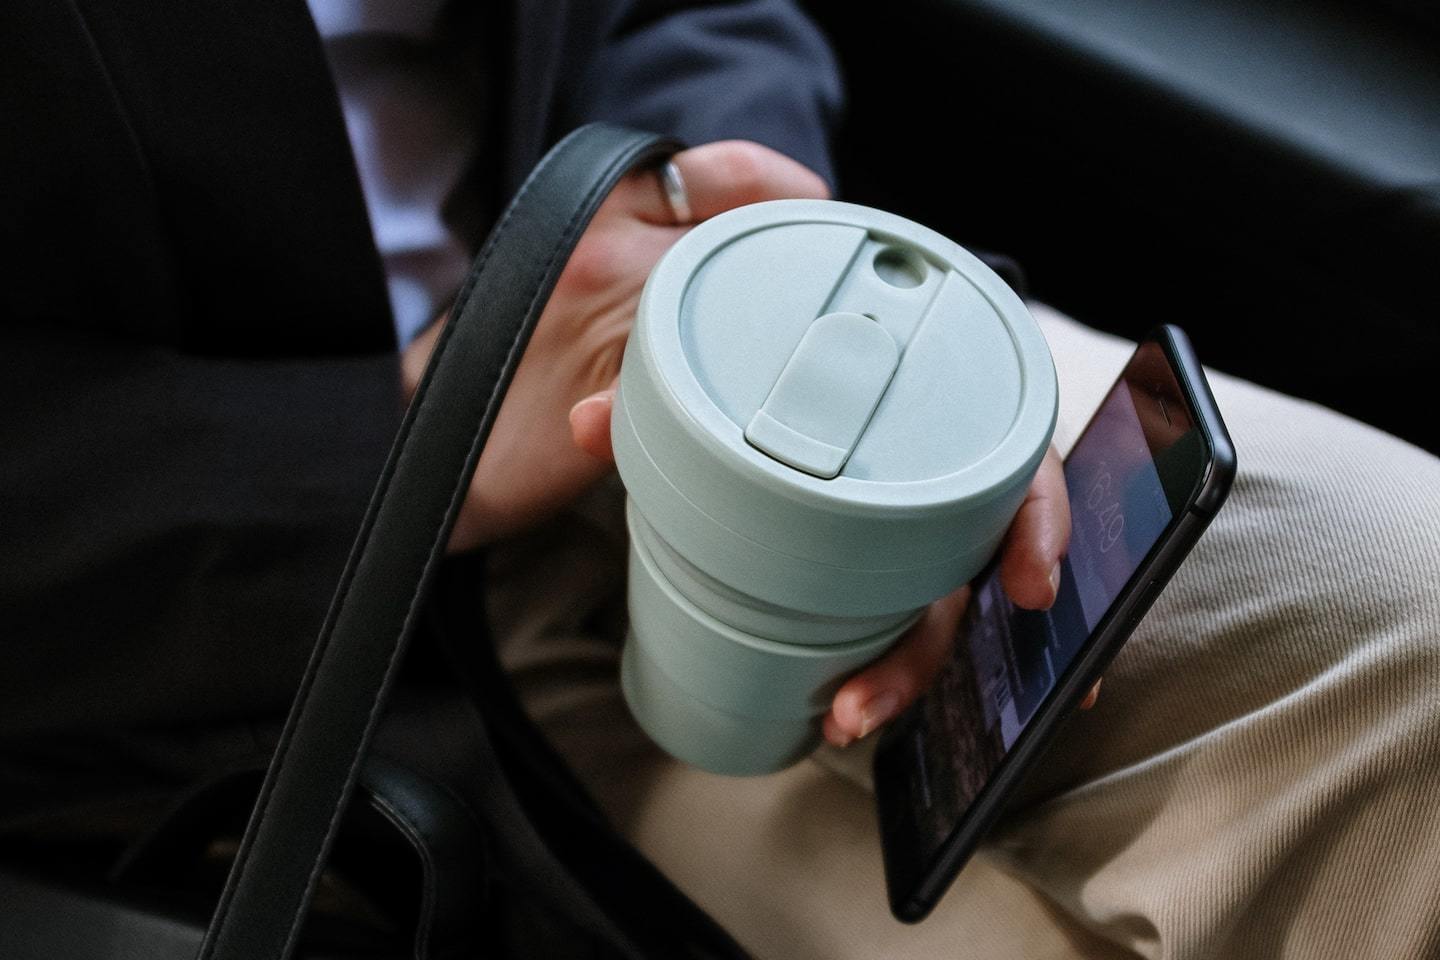 way to travel sustainably: bring a reusable coffee cup